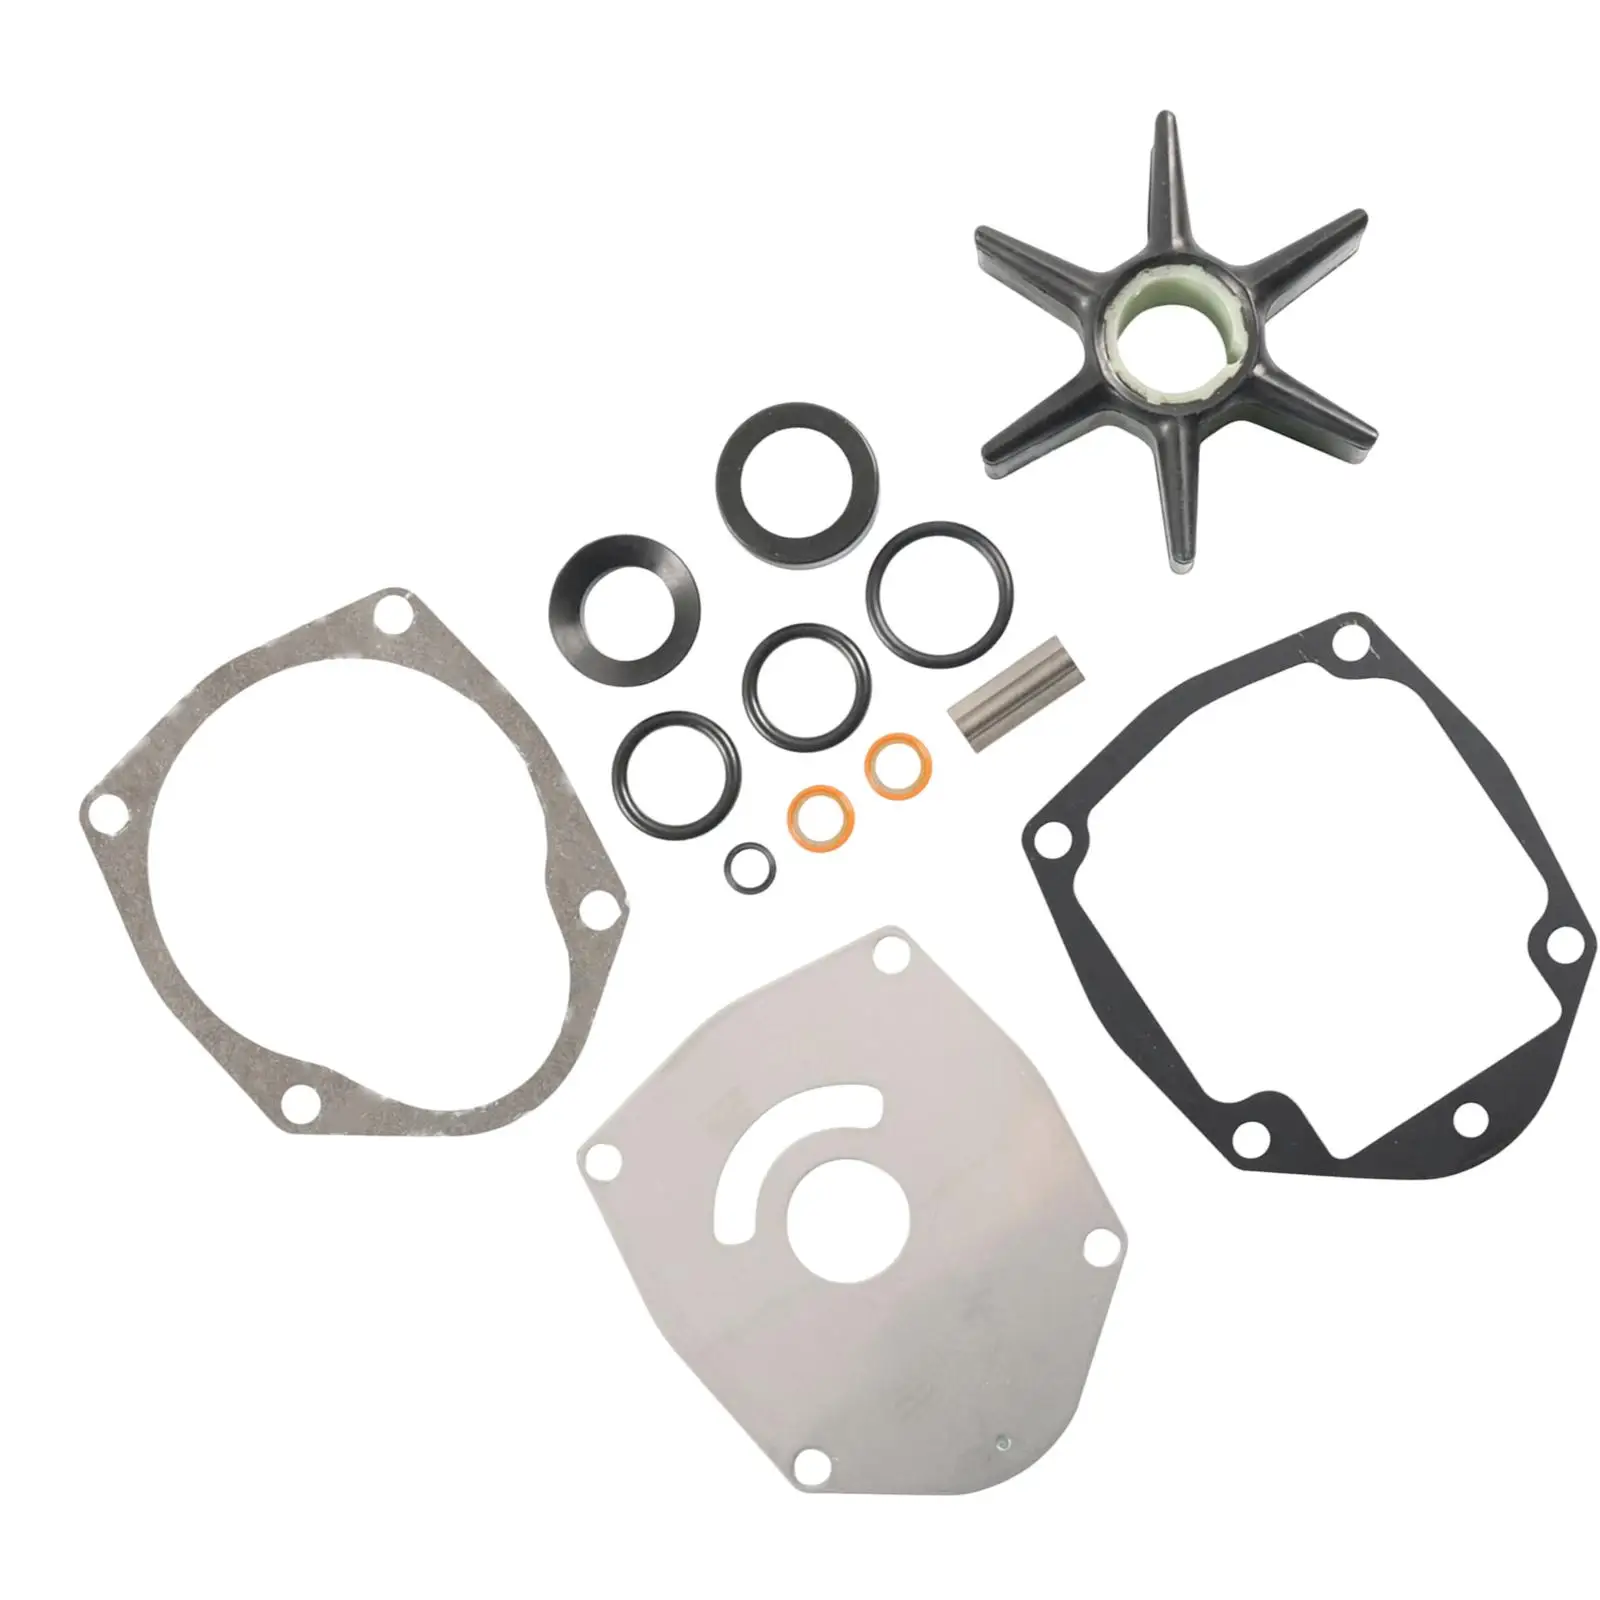 15Pcs Water Pump Impeller Rebuild Kit, 8M0100526 47-43026Q06 for  Outboard  ,Replacement